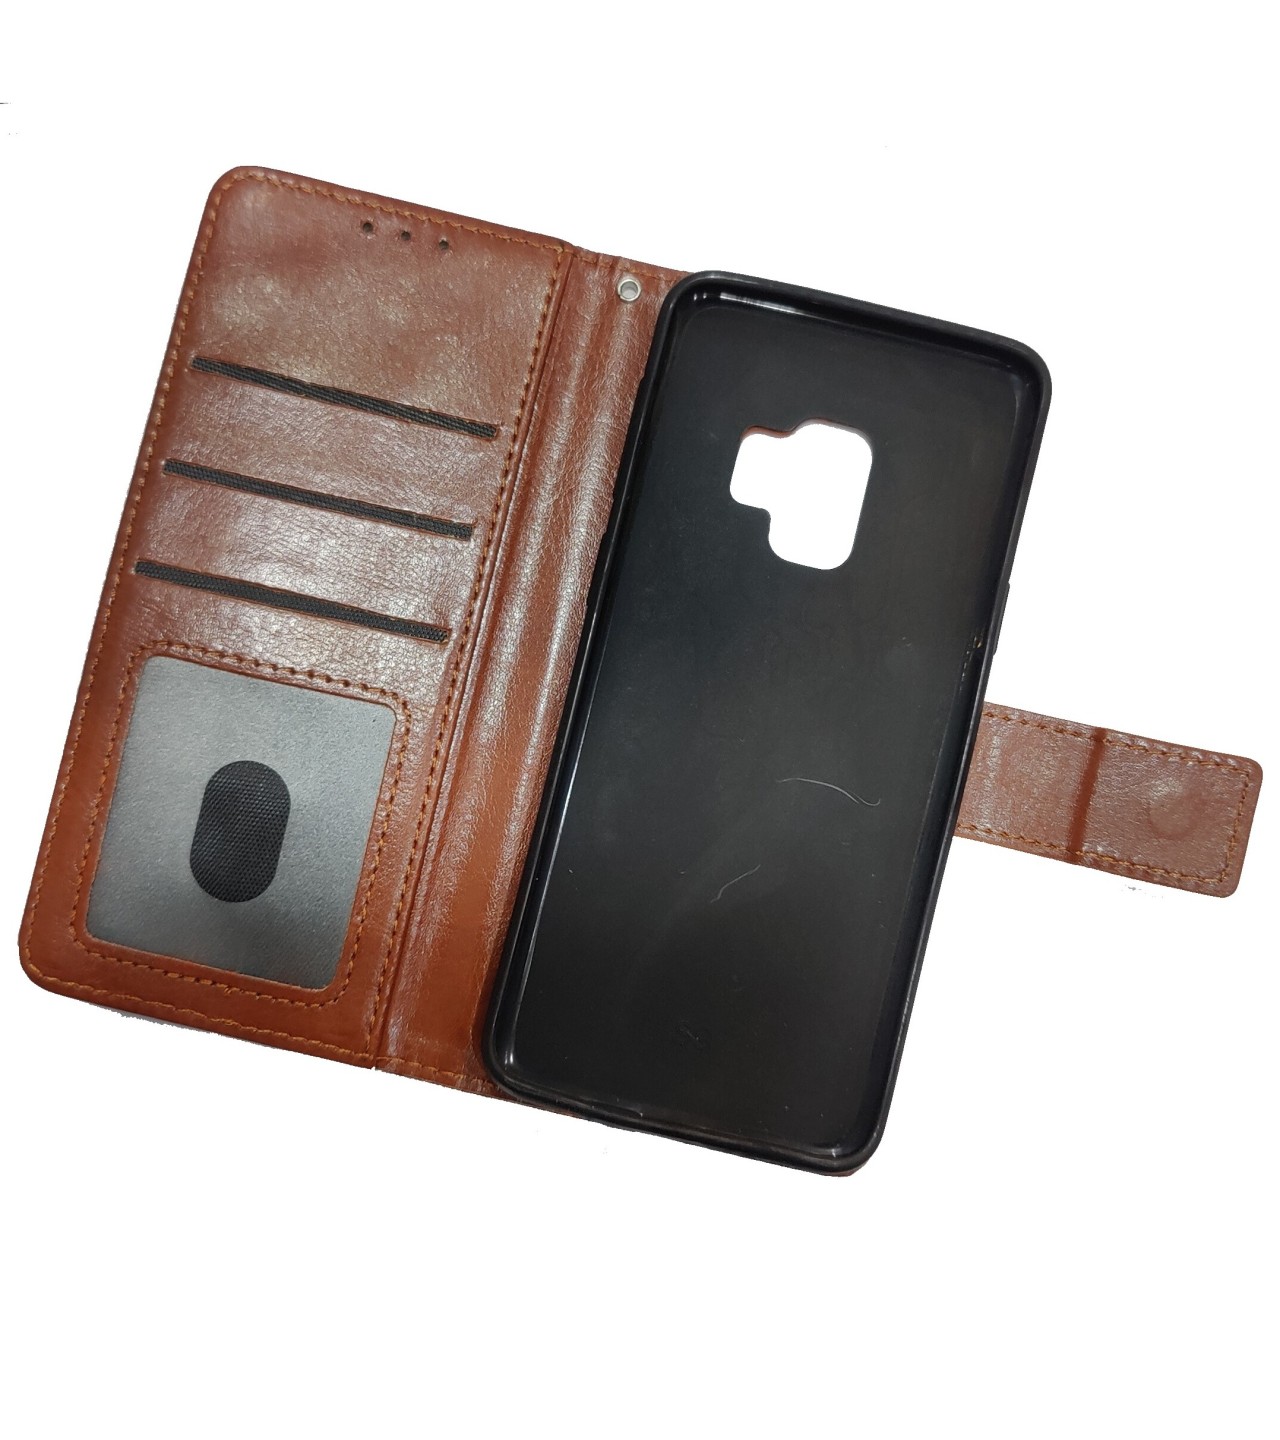 Flip book Wallet Leather OPPO A31 Case with magnetic layer and Stand